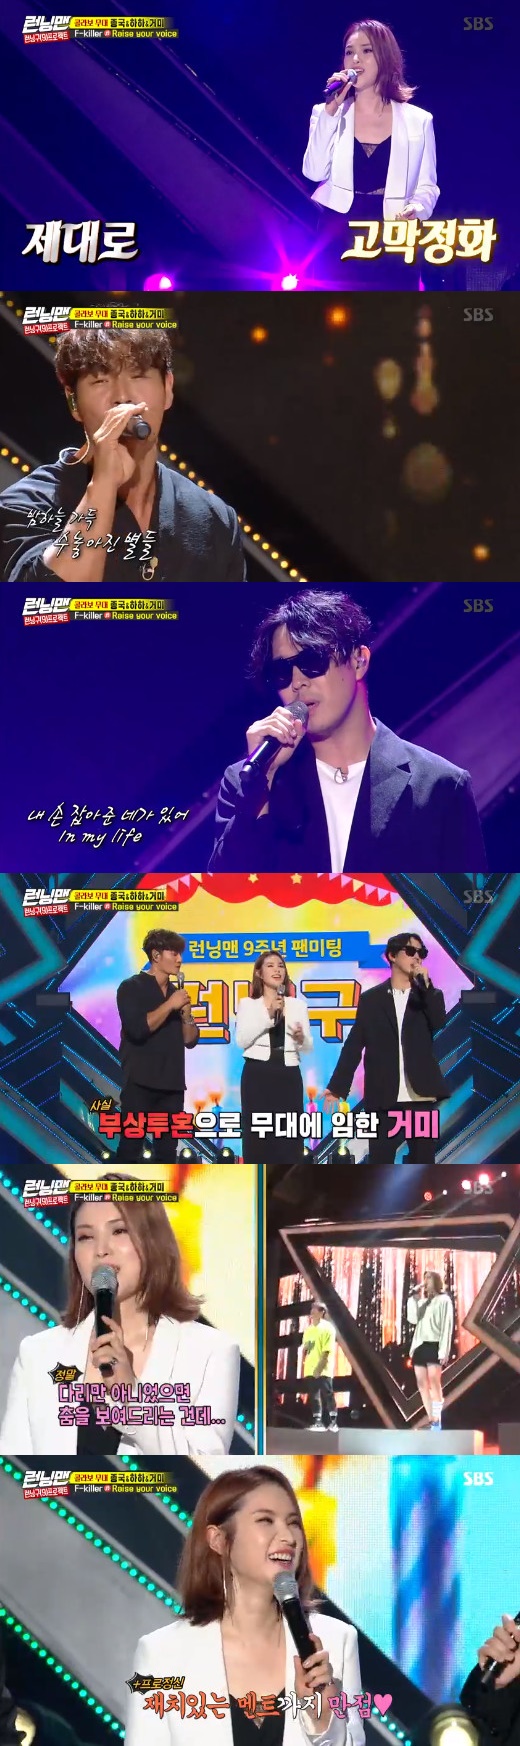 In Running Man, singer Spider showed off his injury struggle and played the stage of fantasy.In Running Man broadcasted on the afternoon of the 22nd, the last story of Nine-year anniversary special Running Man Meeting was drawn.On that day, Spider formed a team called F-killer with Kim Jong-kook and Haha to sing the collaboration song Raise your voice (Raise Your Voice).Spider impressed, filling the stage with a distinctive sweet tone; Kim Jong-kook, an exquisite ensemble with Haha, also snipped viewers minds.Spider is an injury struggle; he hurt Leg, Haha said, adding: Please give me another round of applause.Spider then laughed, I am really sorry to show you dance if it is not Leg.